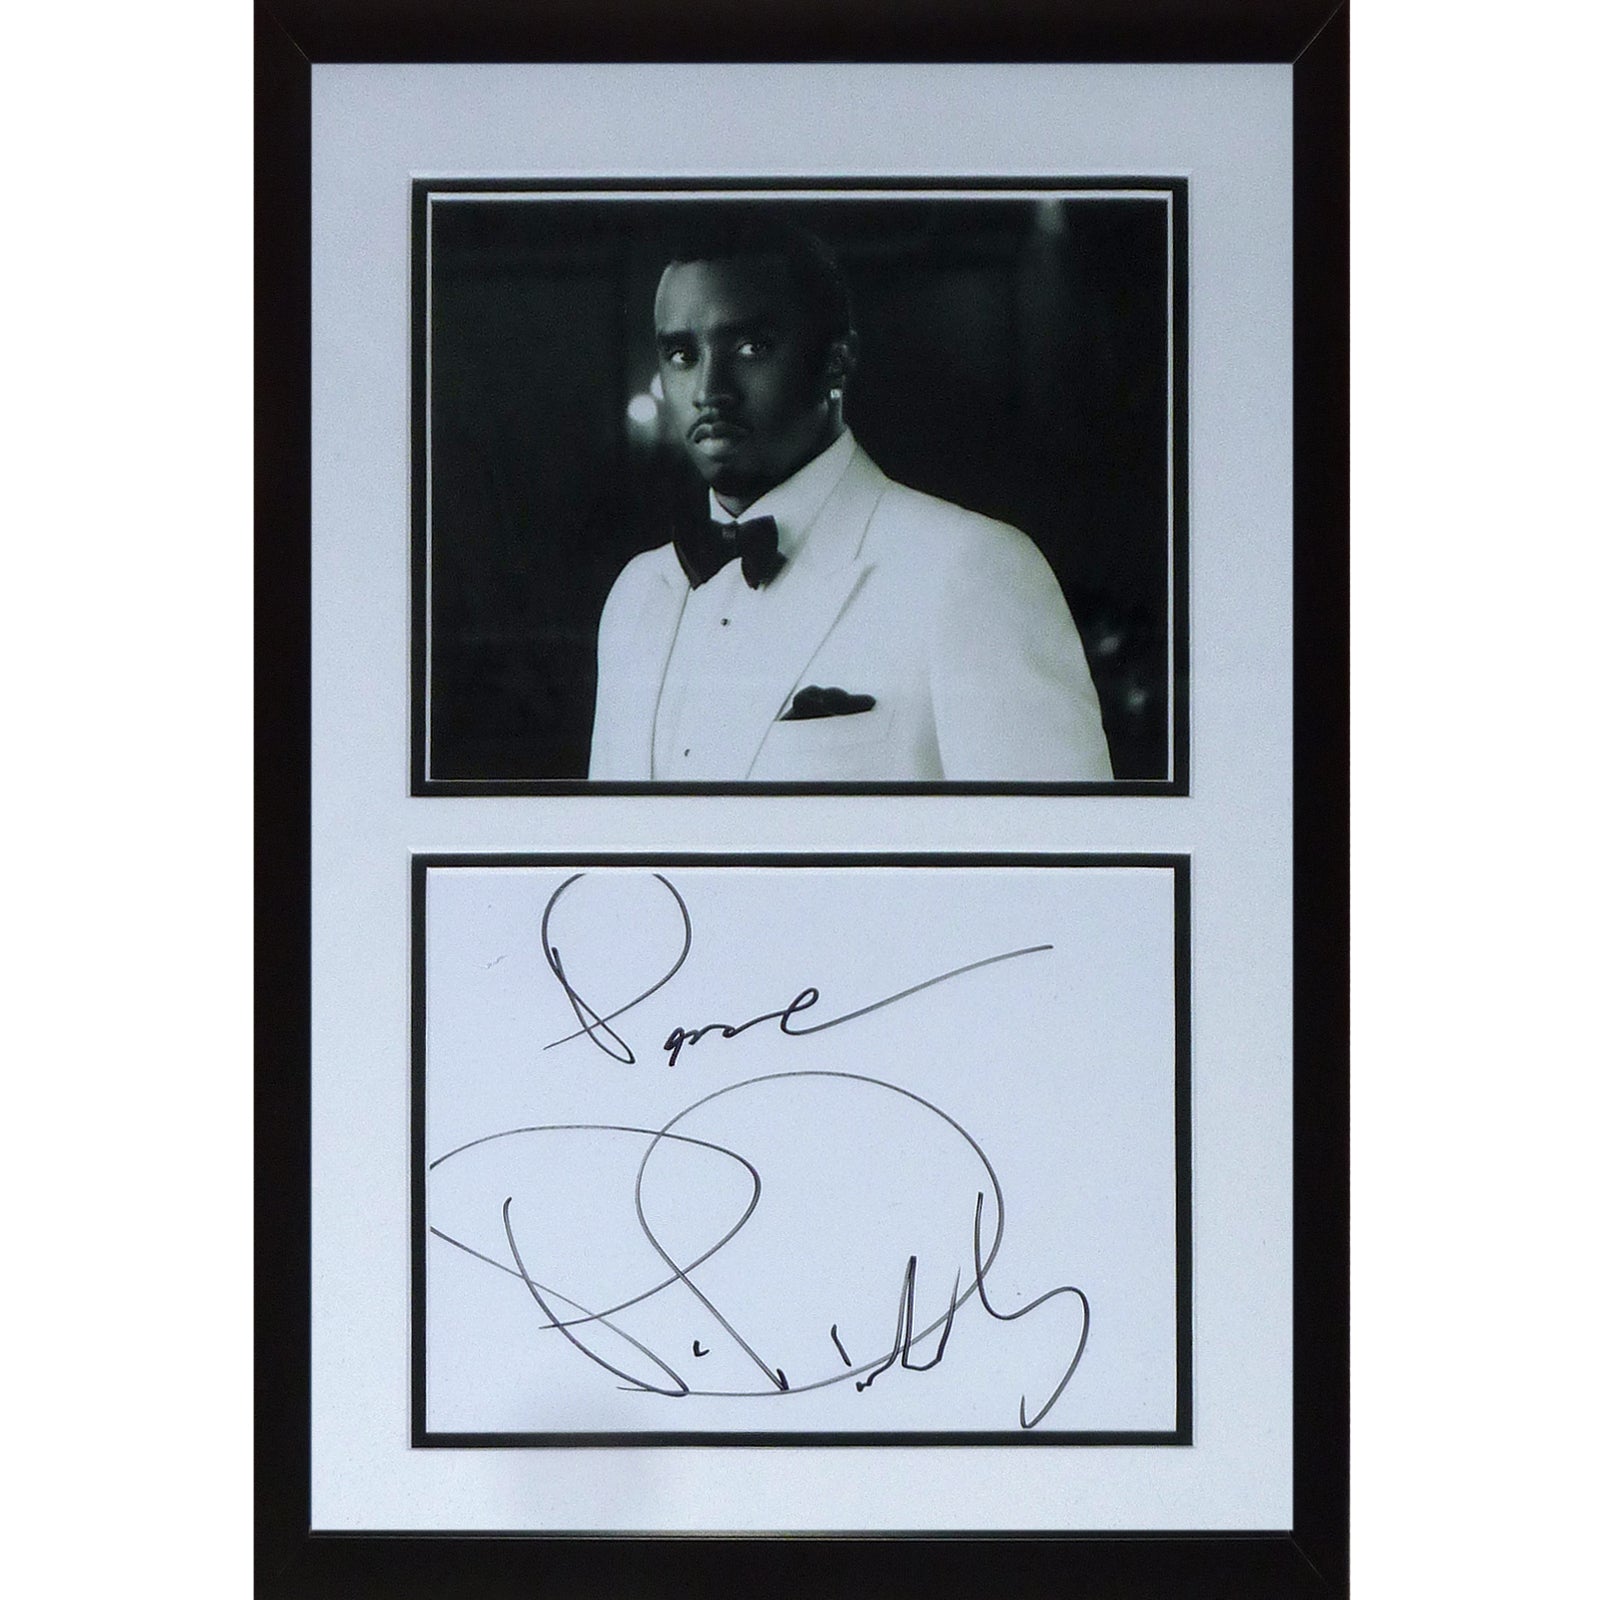 SEAN COMBS P. DIDDY PUFF DADDY SIGNED AUTOGRAPHED 8X10 PHOTO RAP LEGEND BAS  COA